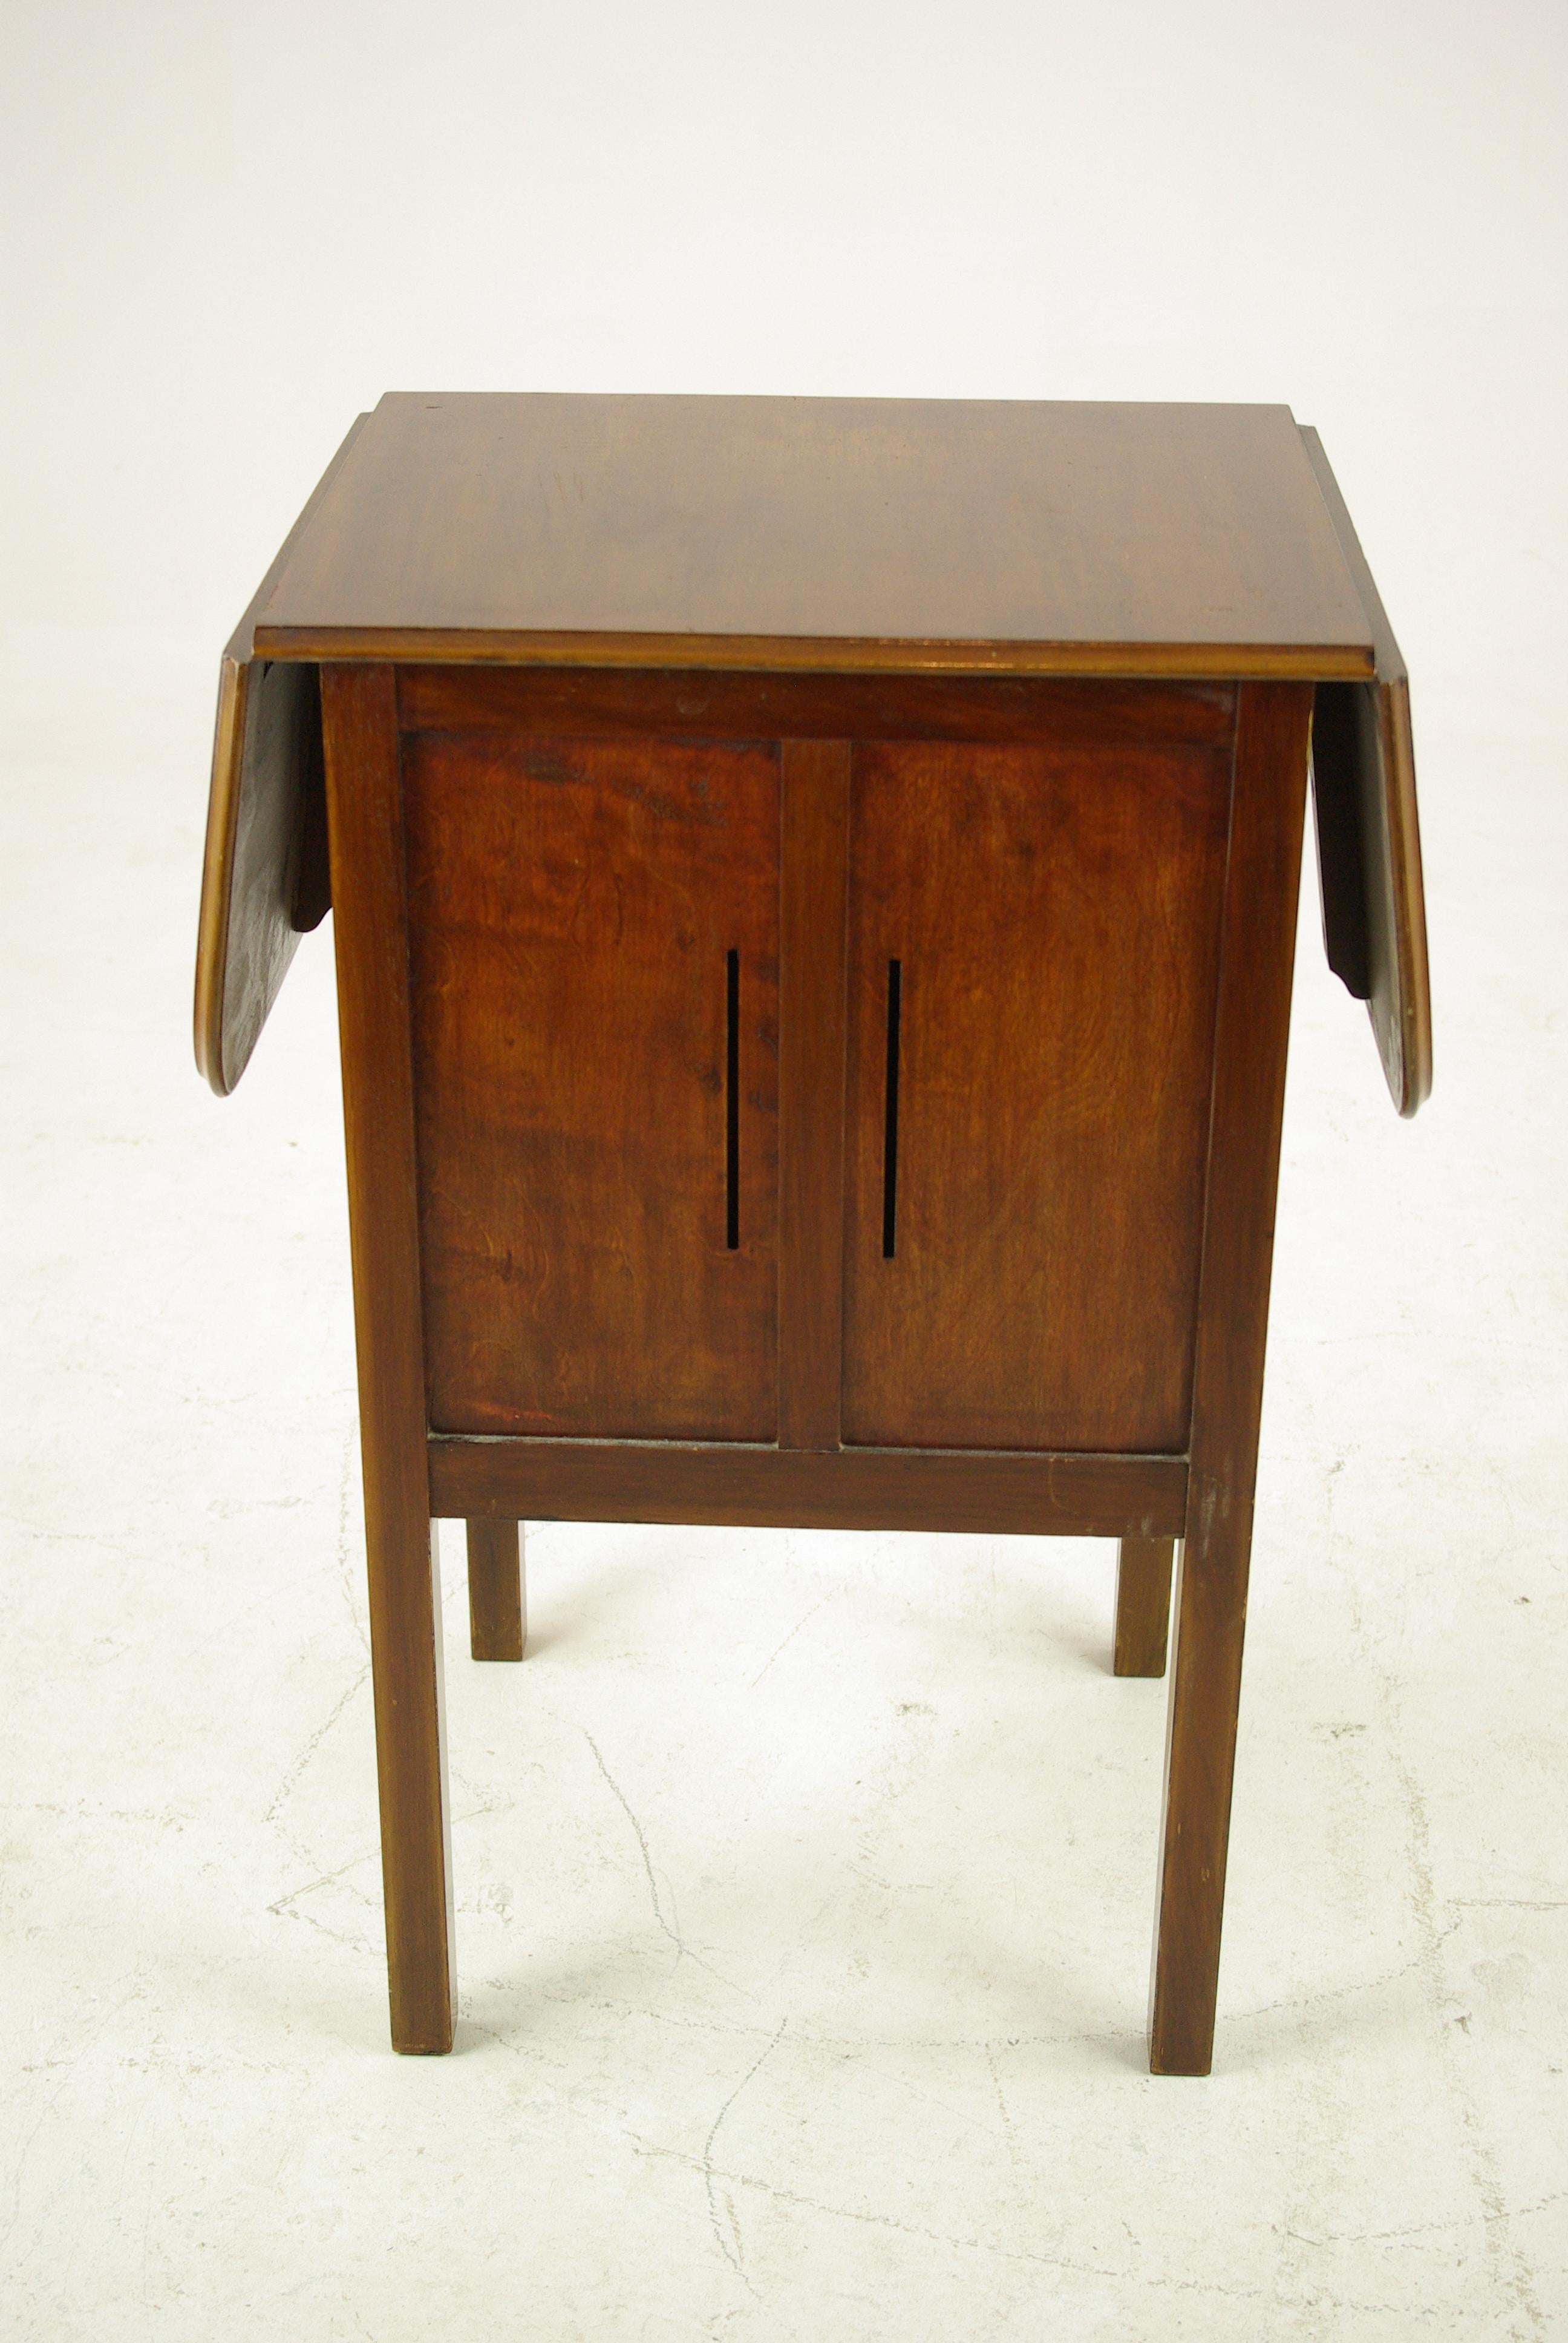 Vintage Walnut Nightstand, Lamp Table with Drop Leaves, Scotland 1930, H029 1